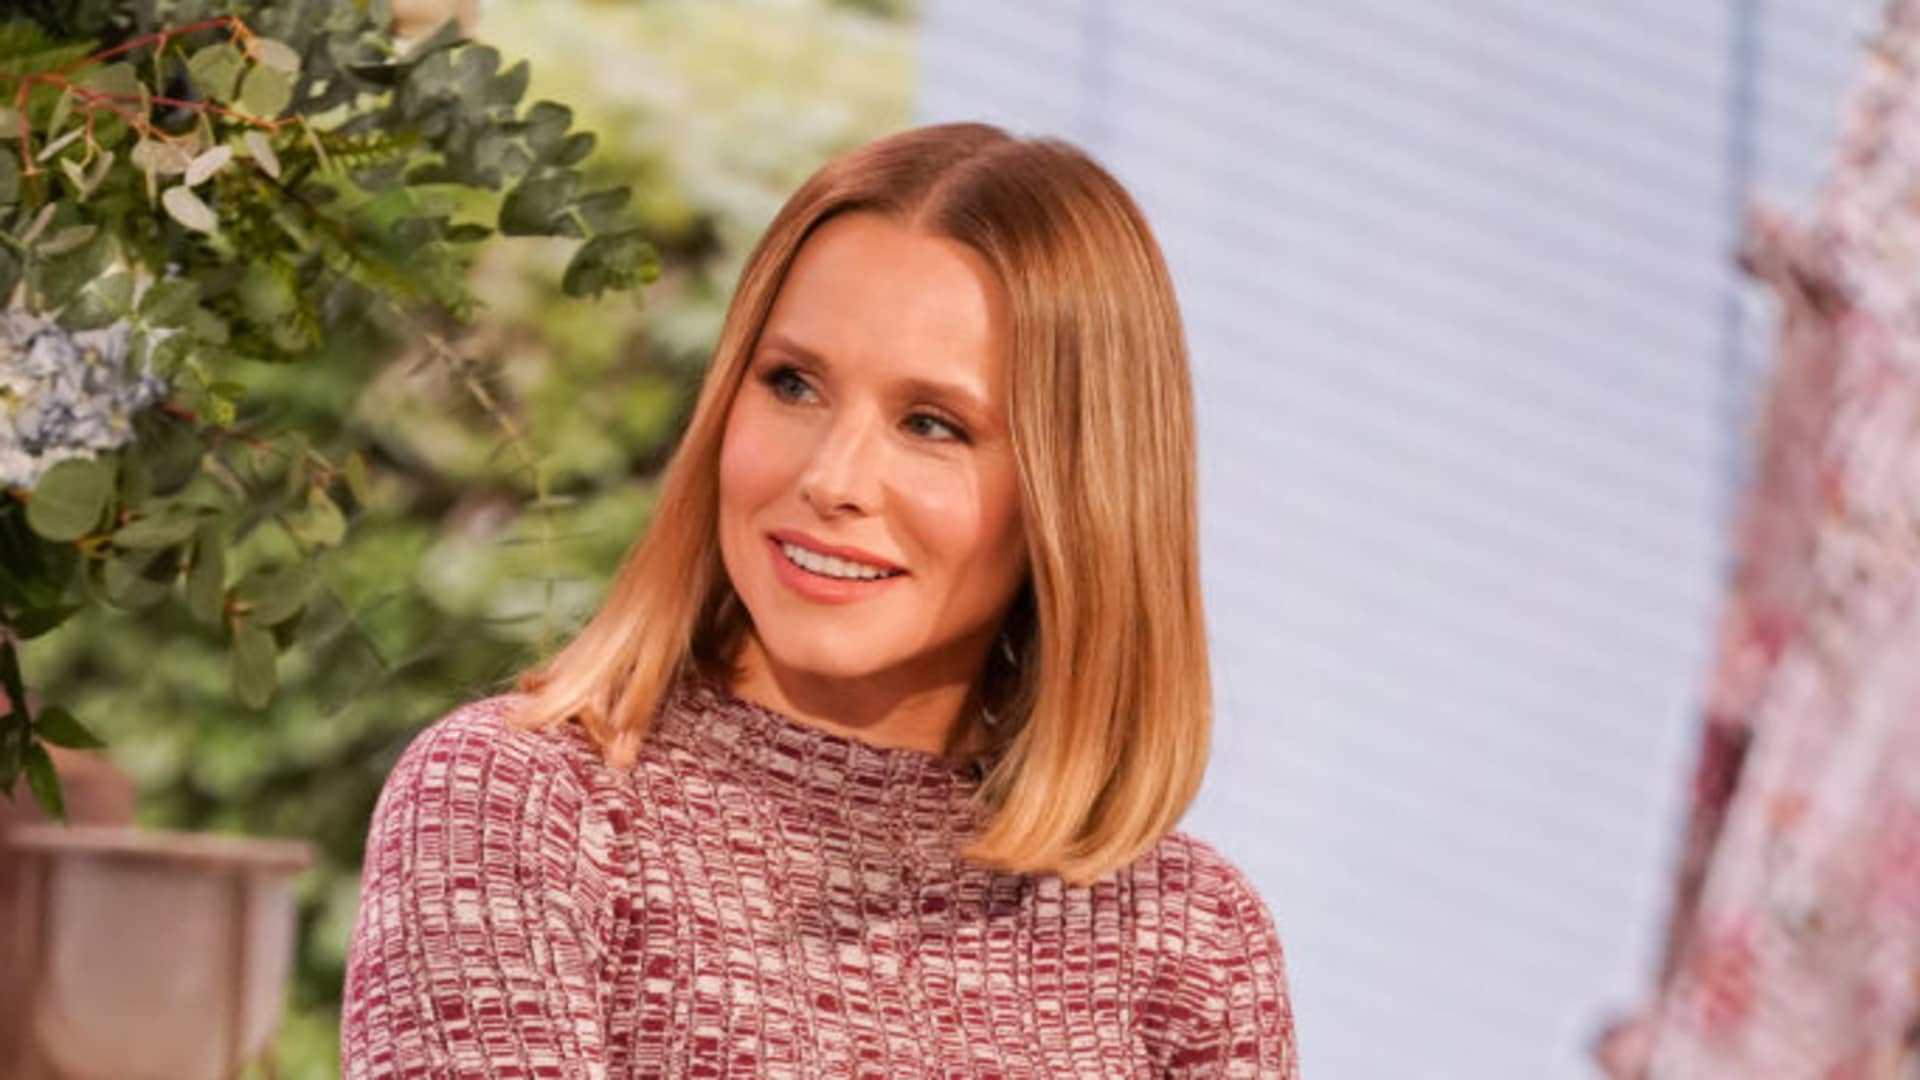 Kristen Bell: In business, 'I don't have an MBA,' so I make up for it with 'emotional intelligence'